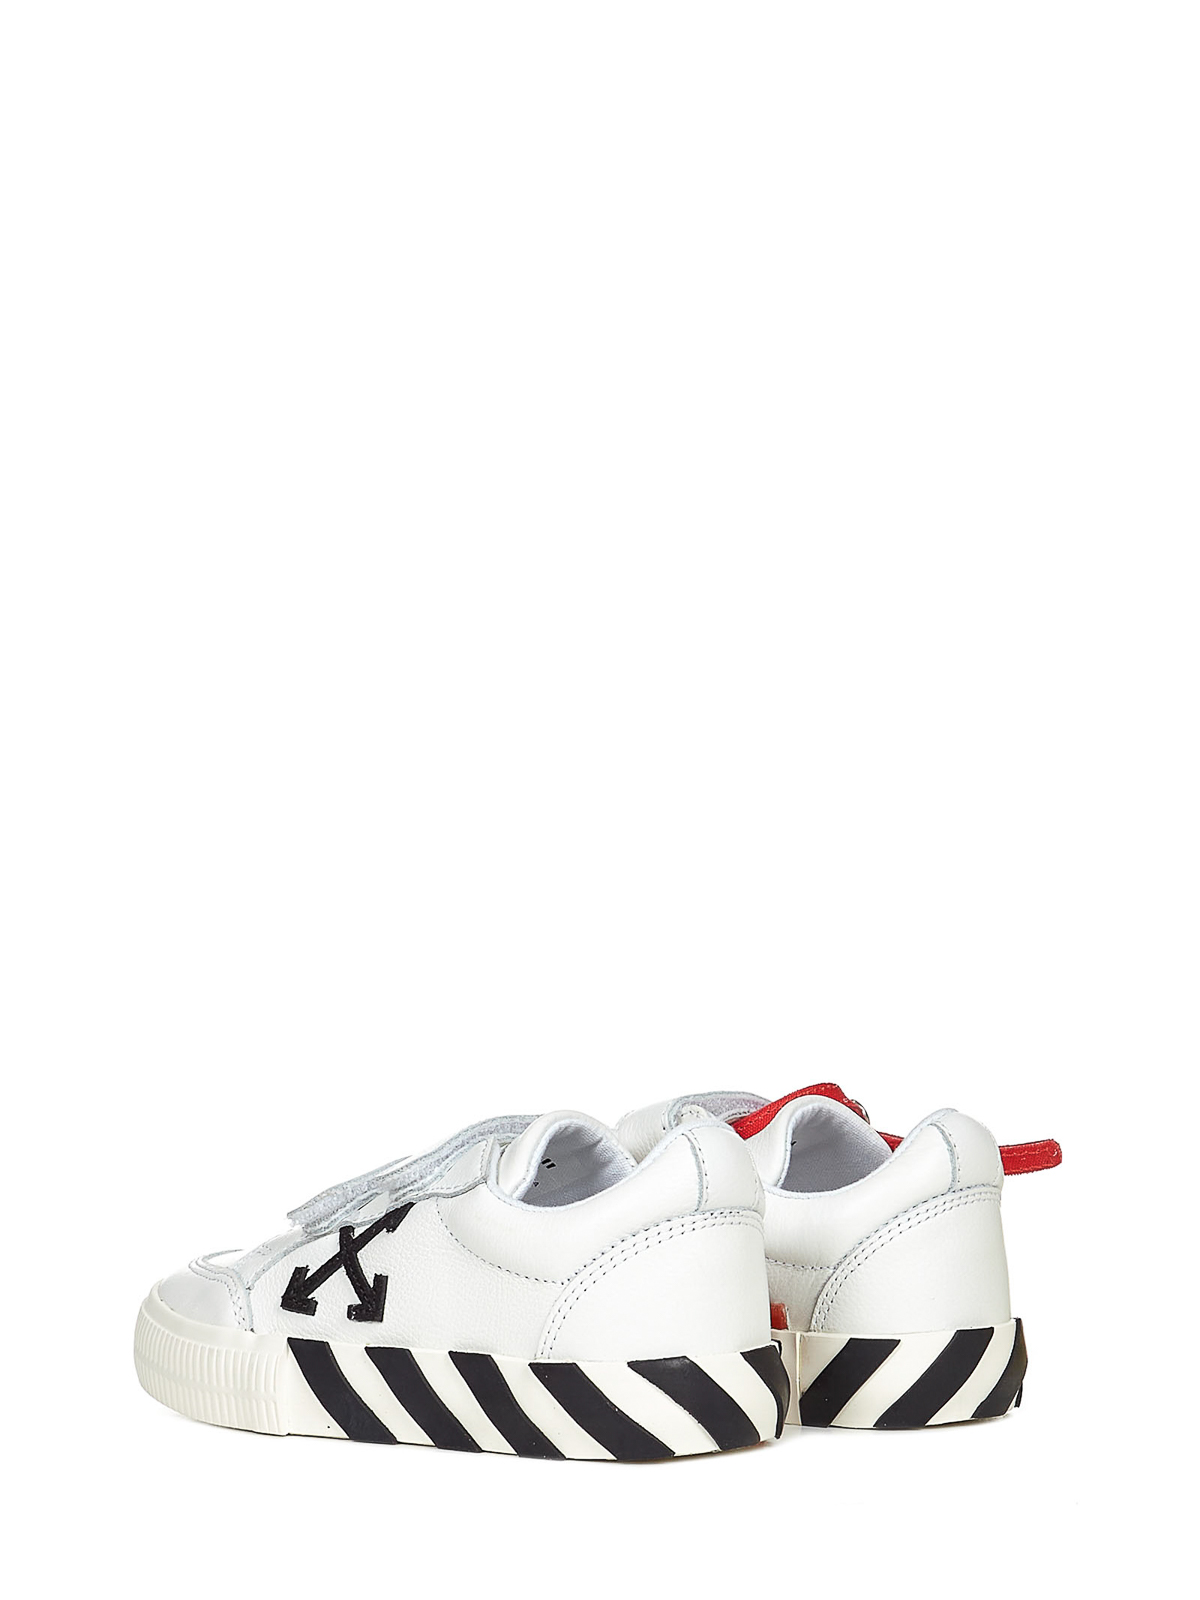 Off-White Kid's Arrow Stripe Leather Low-Top Sneakers, Toddler